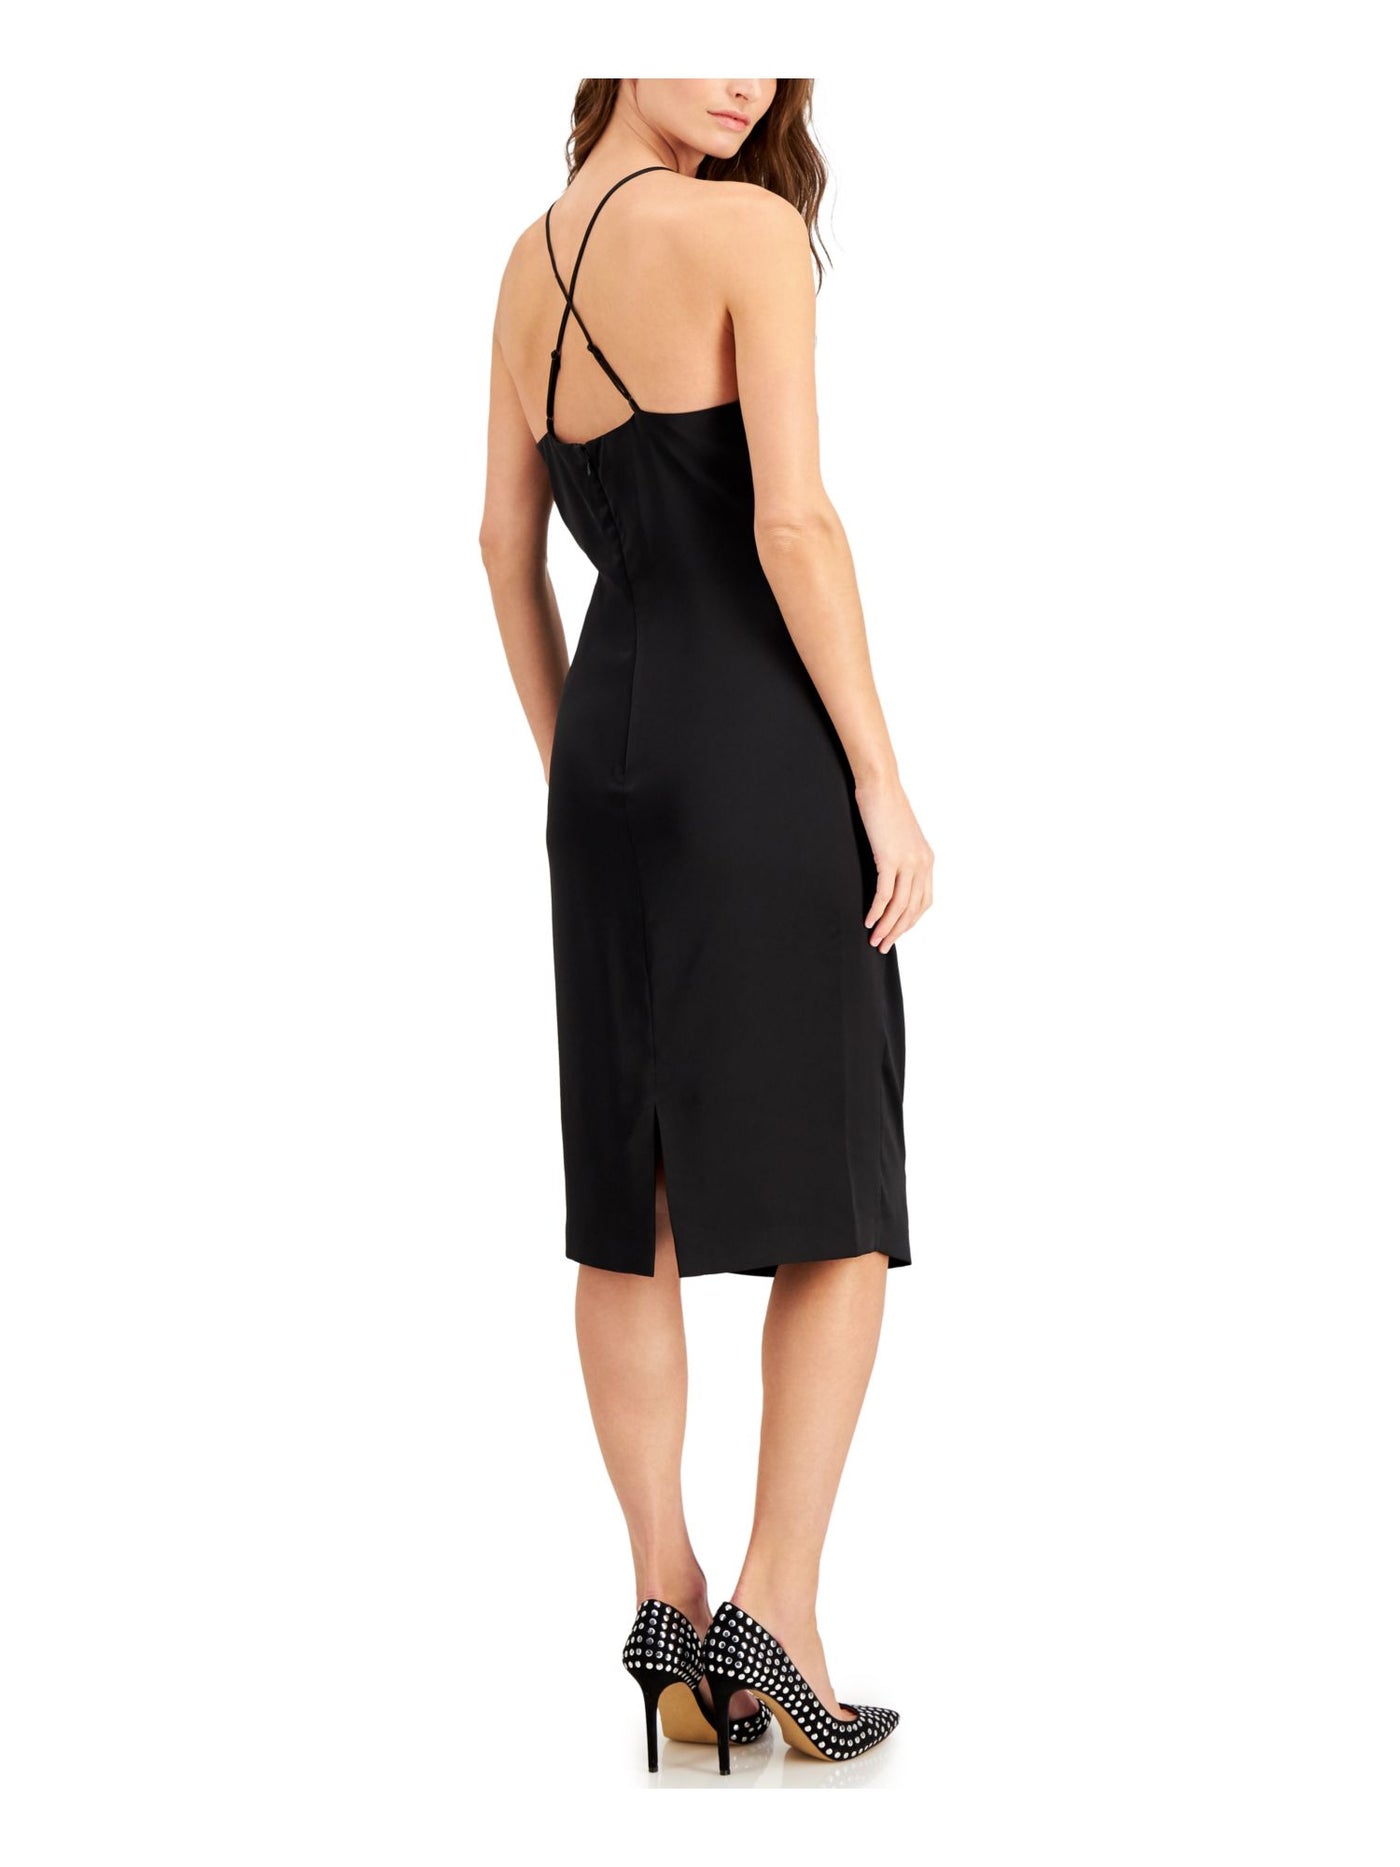 LAUNDRY Womens Black Stretch Zippered Ruched Crisscross Straps At Back Sleeveless Halter Knee Length Party Body Con Dress 12